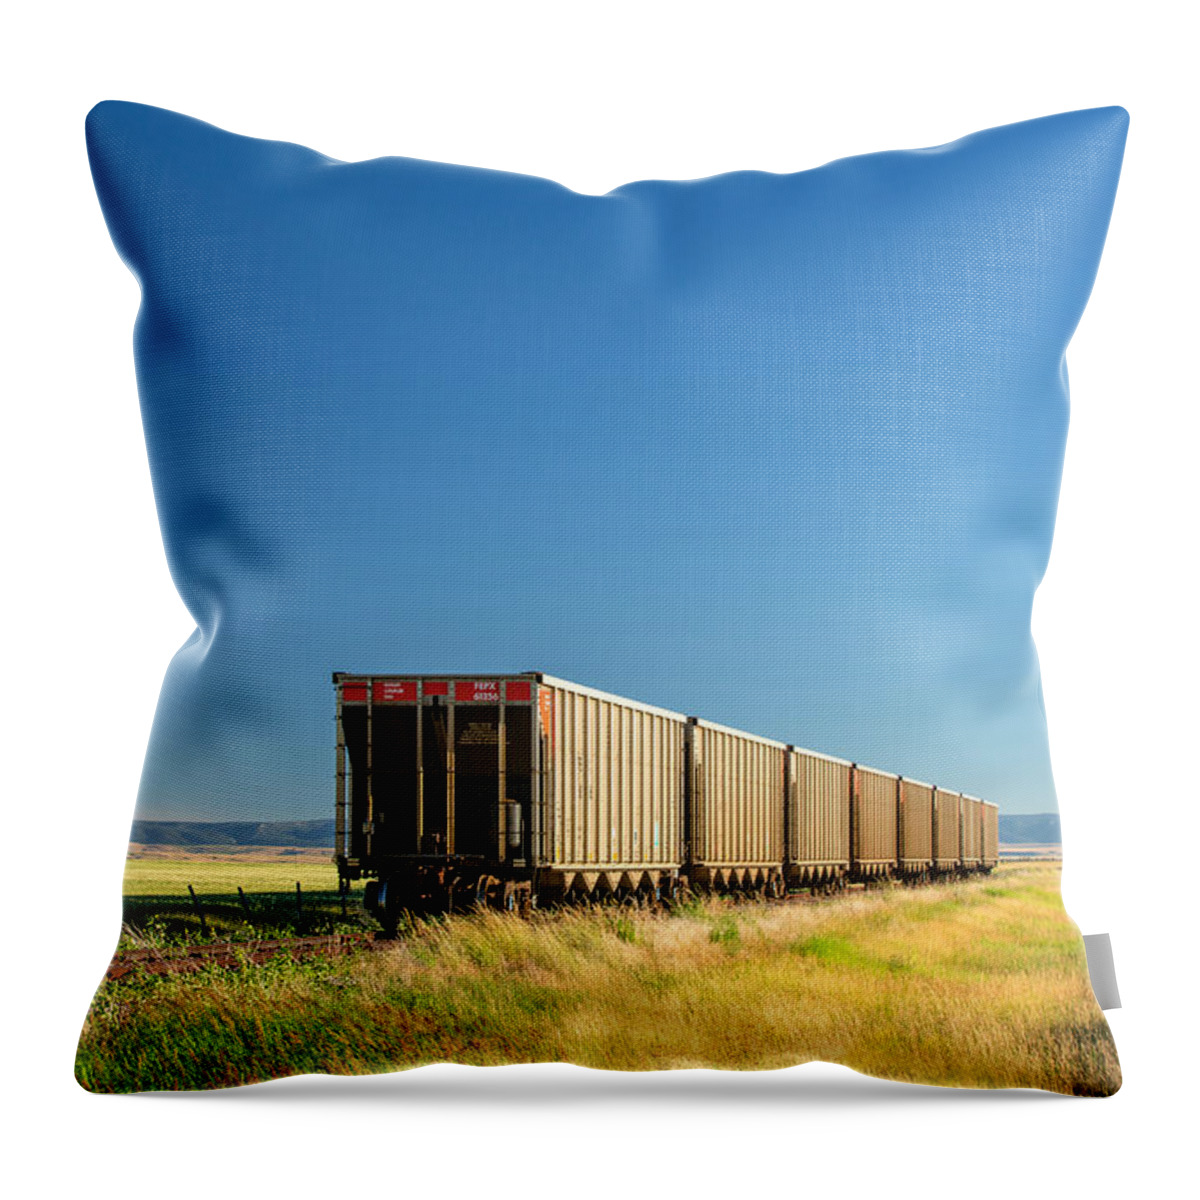 Railroad Throw Pillow featuring the photograph Hopper Row by Todd Klassy